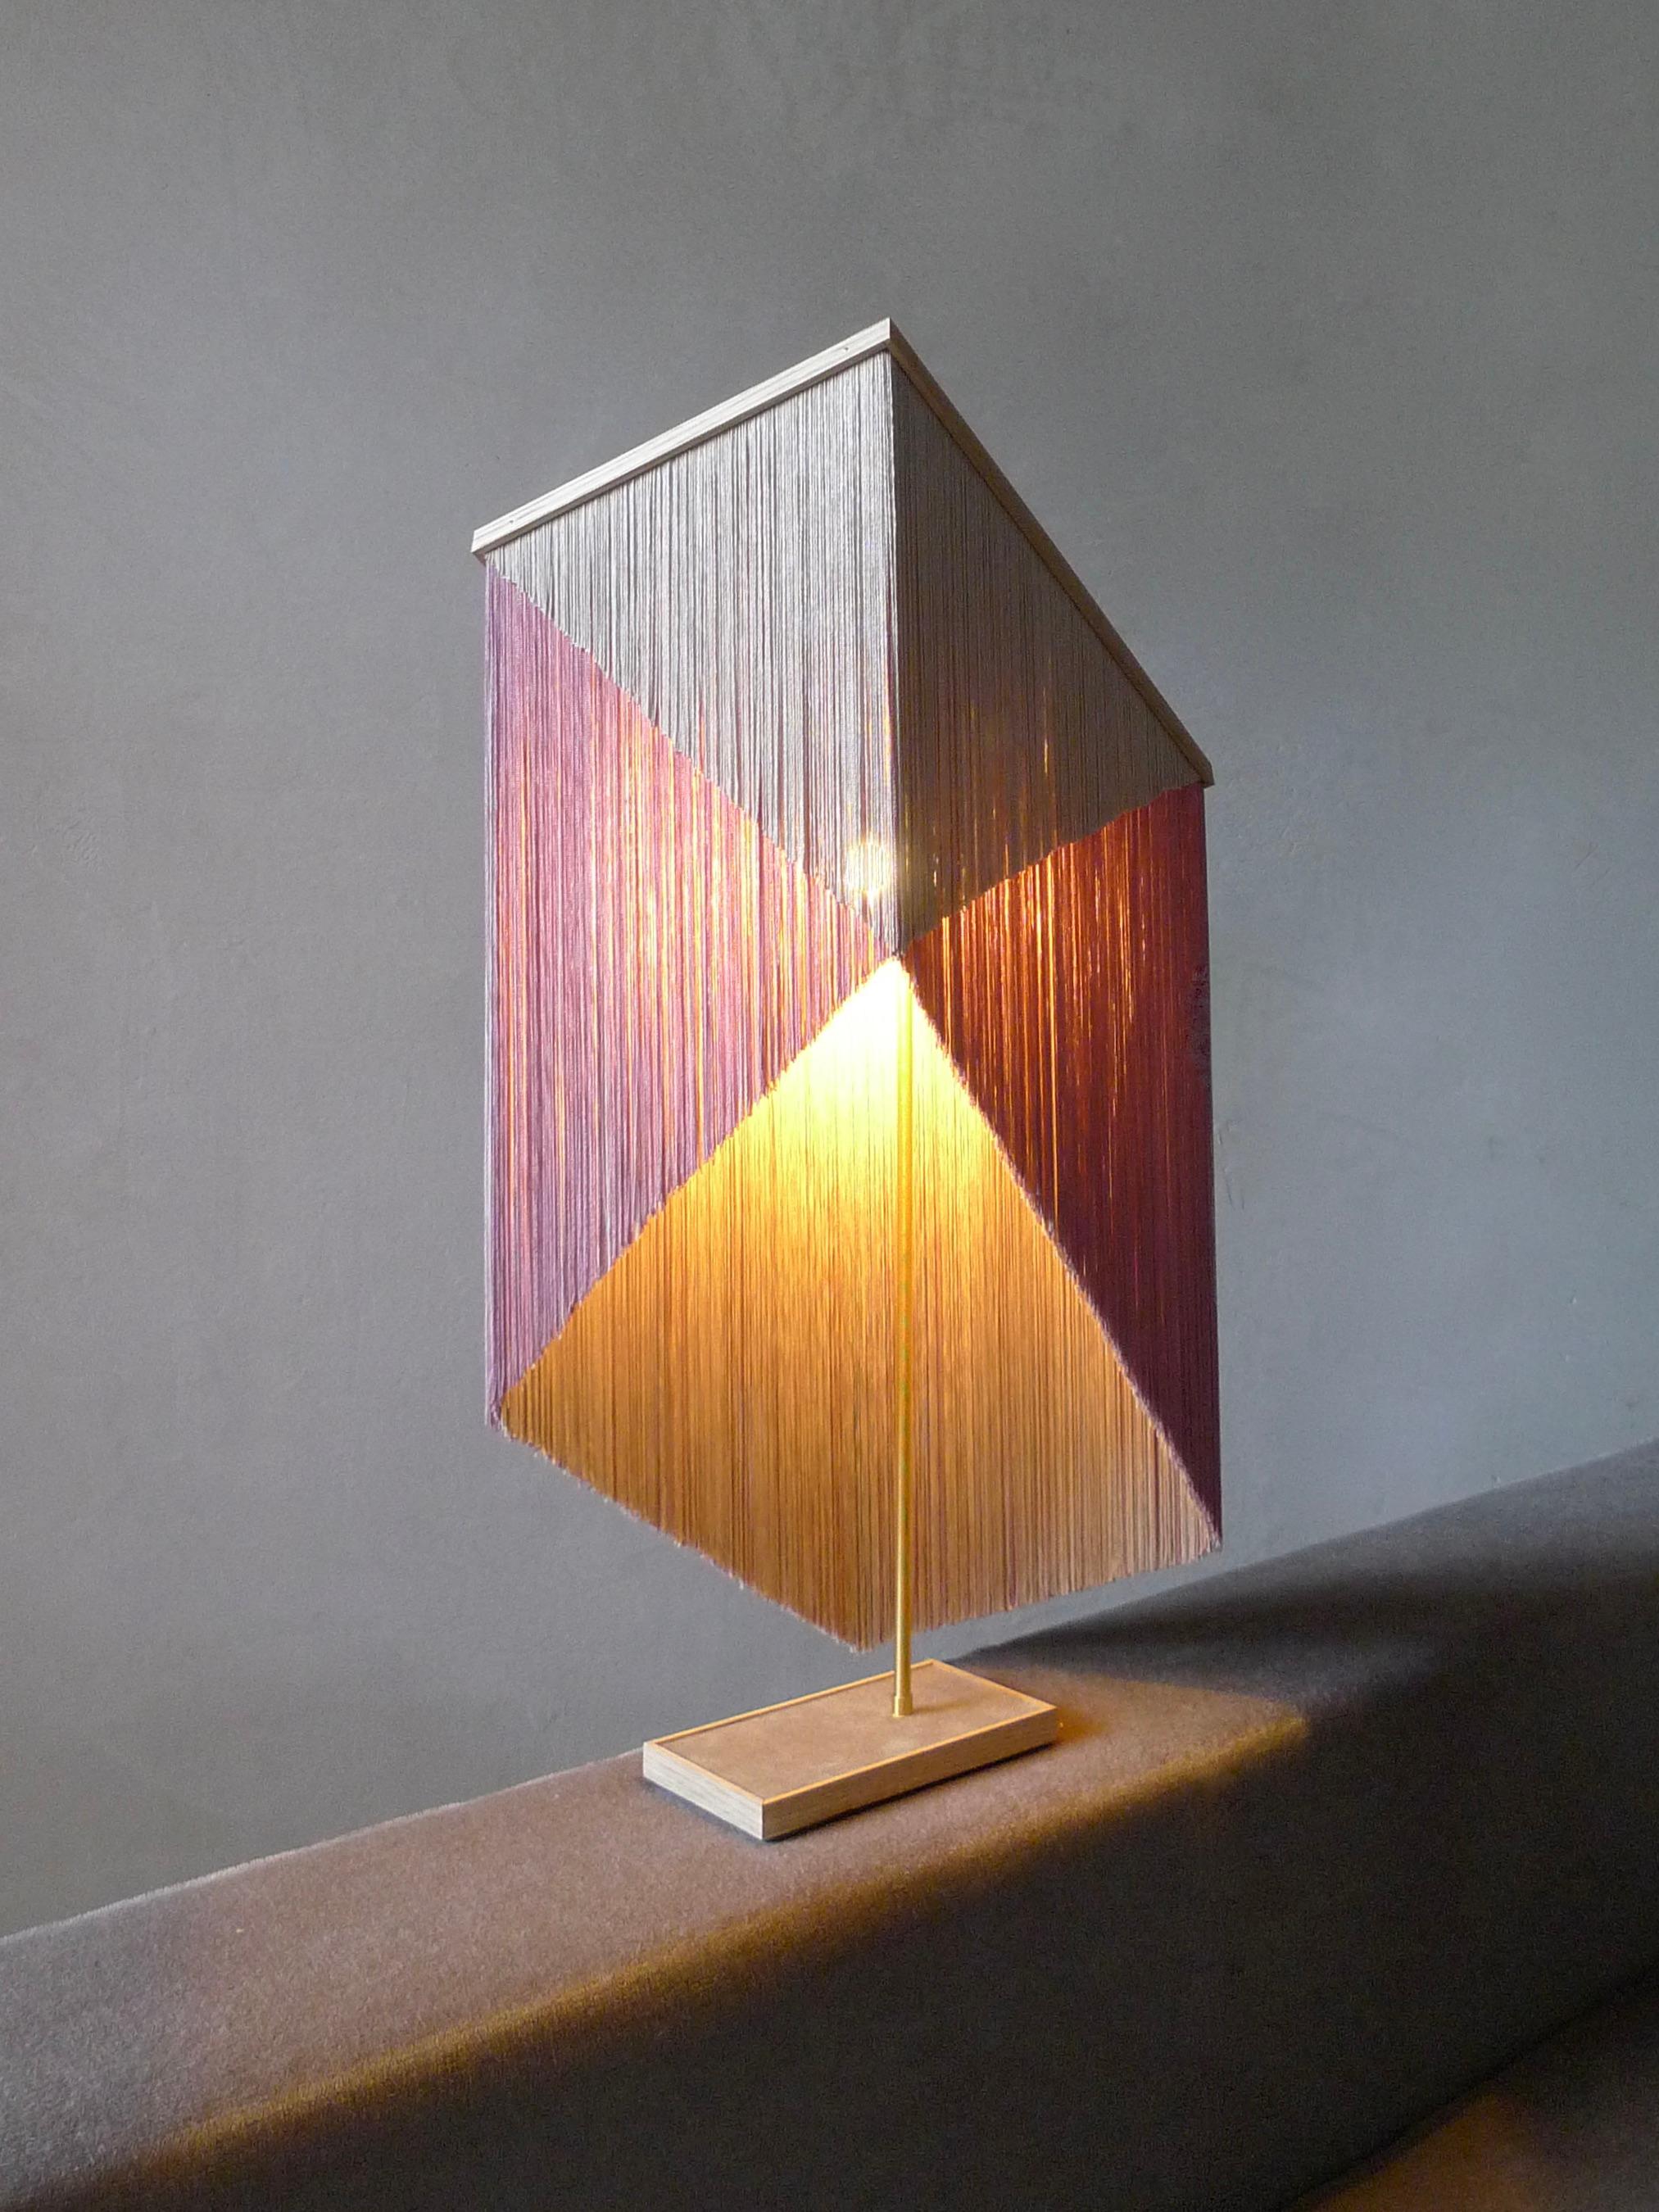 No. 30 table lamp by Sander Bottinga.
Object size 3.
Dimensions: H 60-75 x W 37 x D 26 cm.
Materials: brass, wood, leather, viscose fringes
Variations available. 

Handmade in brass, wood, leather and 3 double layered viscose fringes